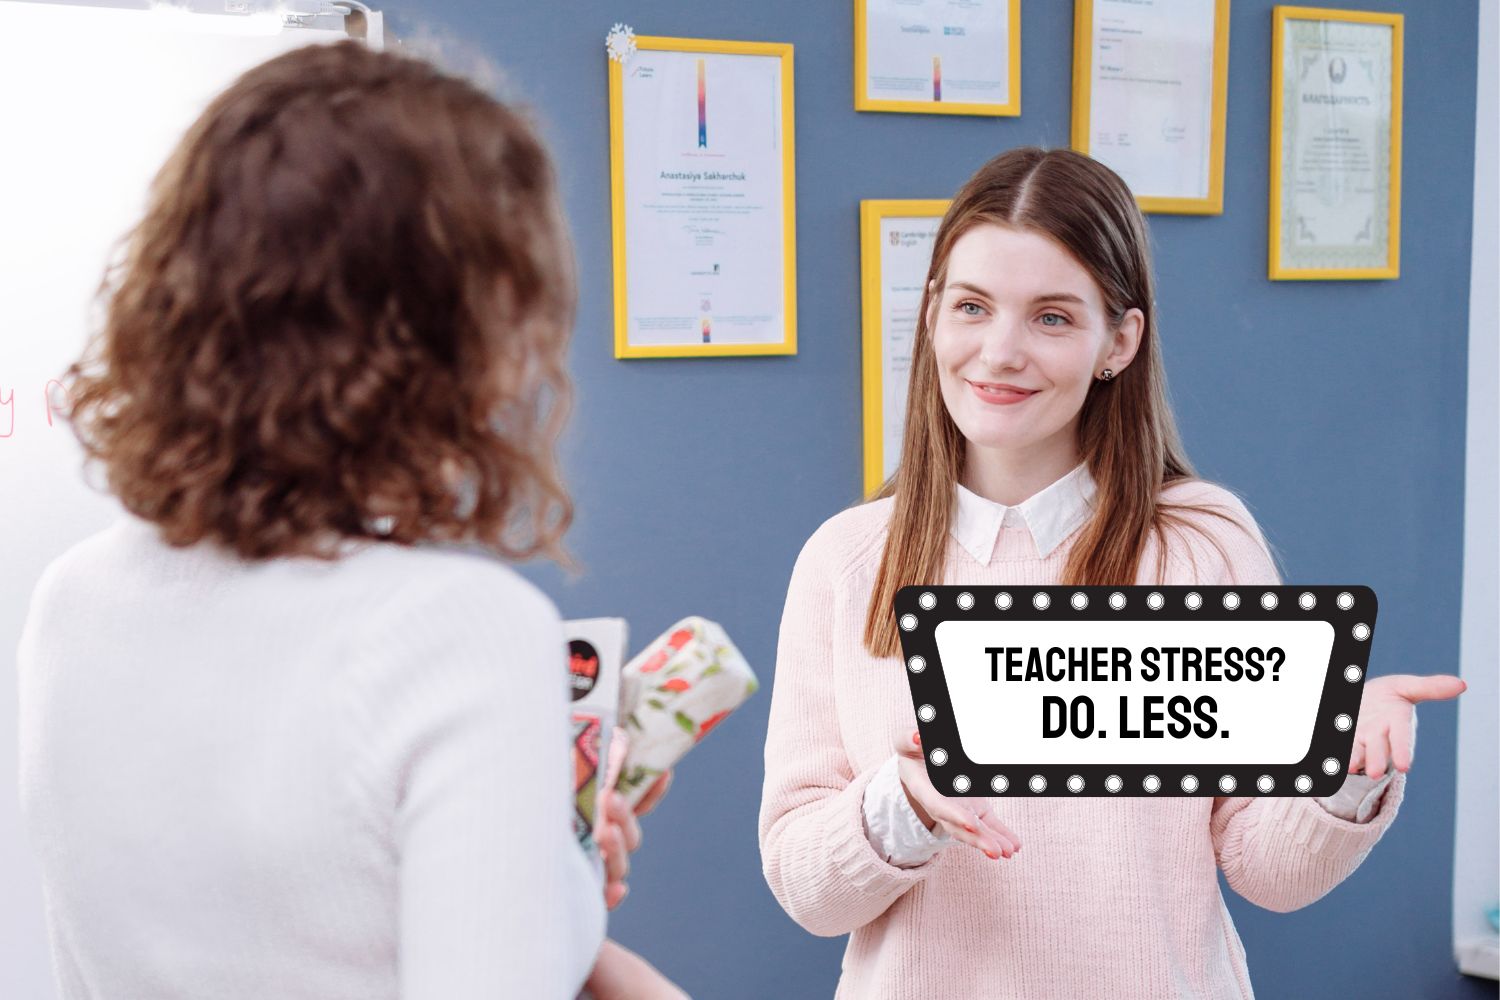 A woman in class who is quiet quitting teaching holds up a sign sign that says, "Teacher stress? Do less."